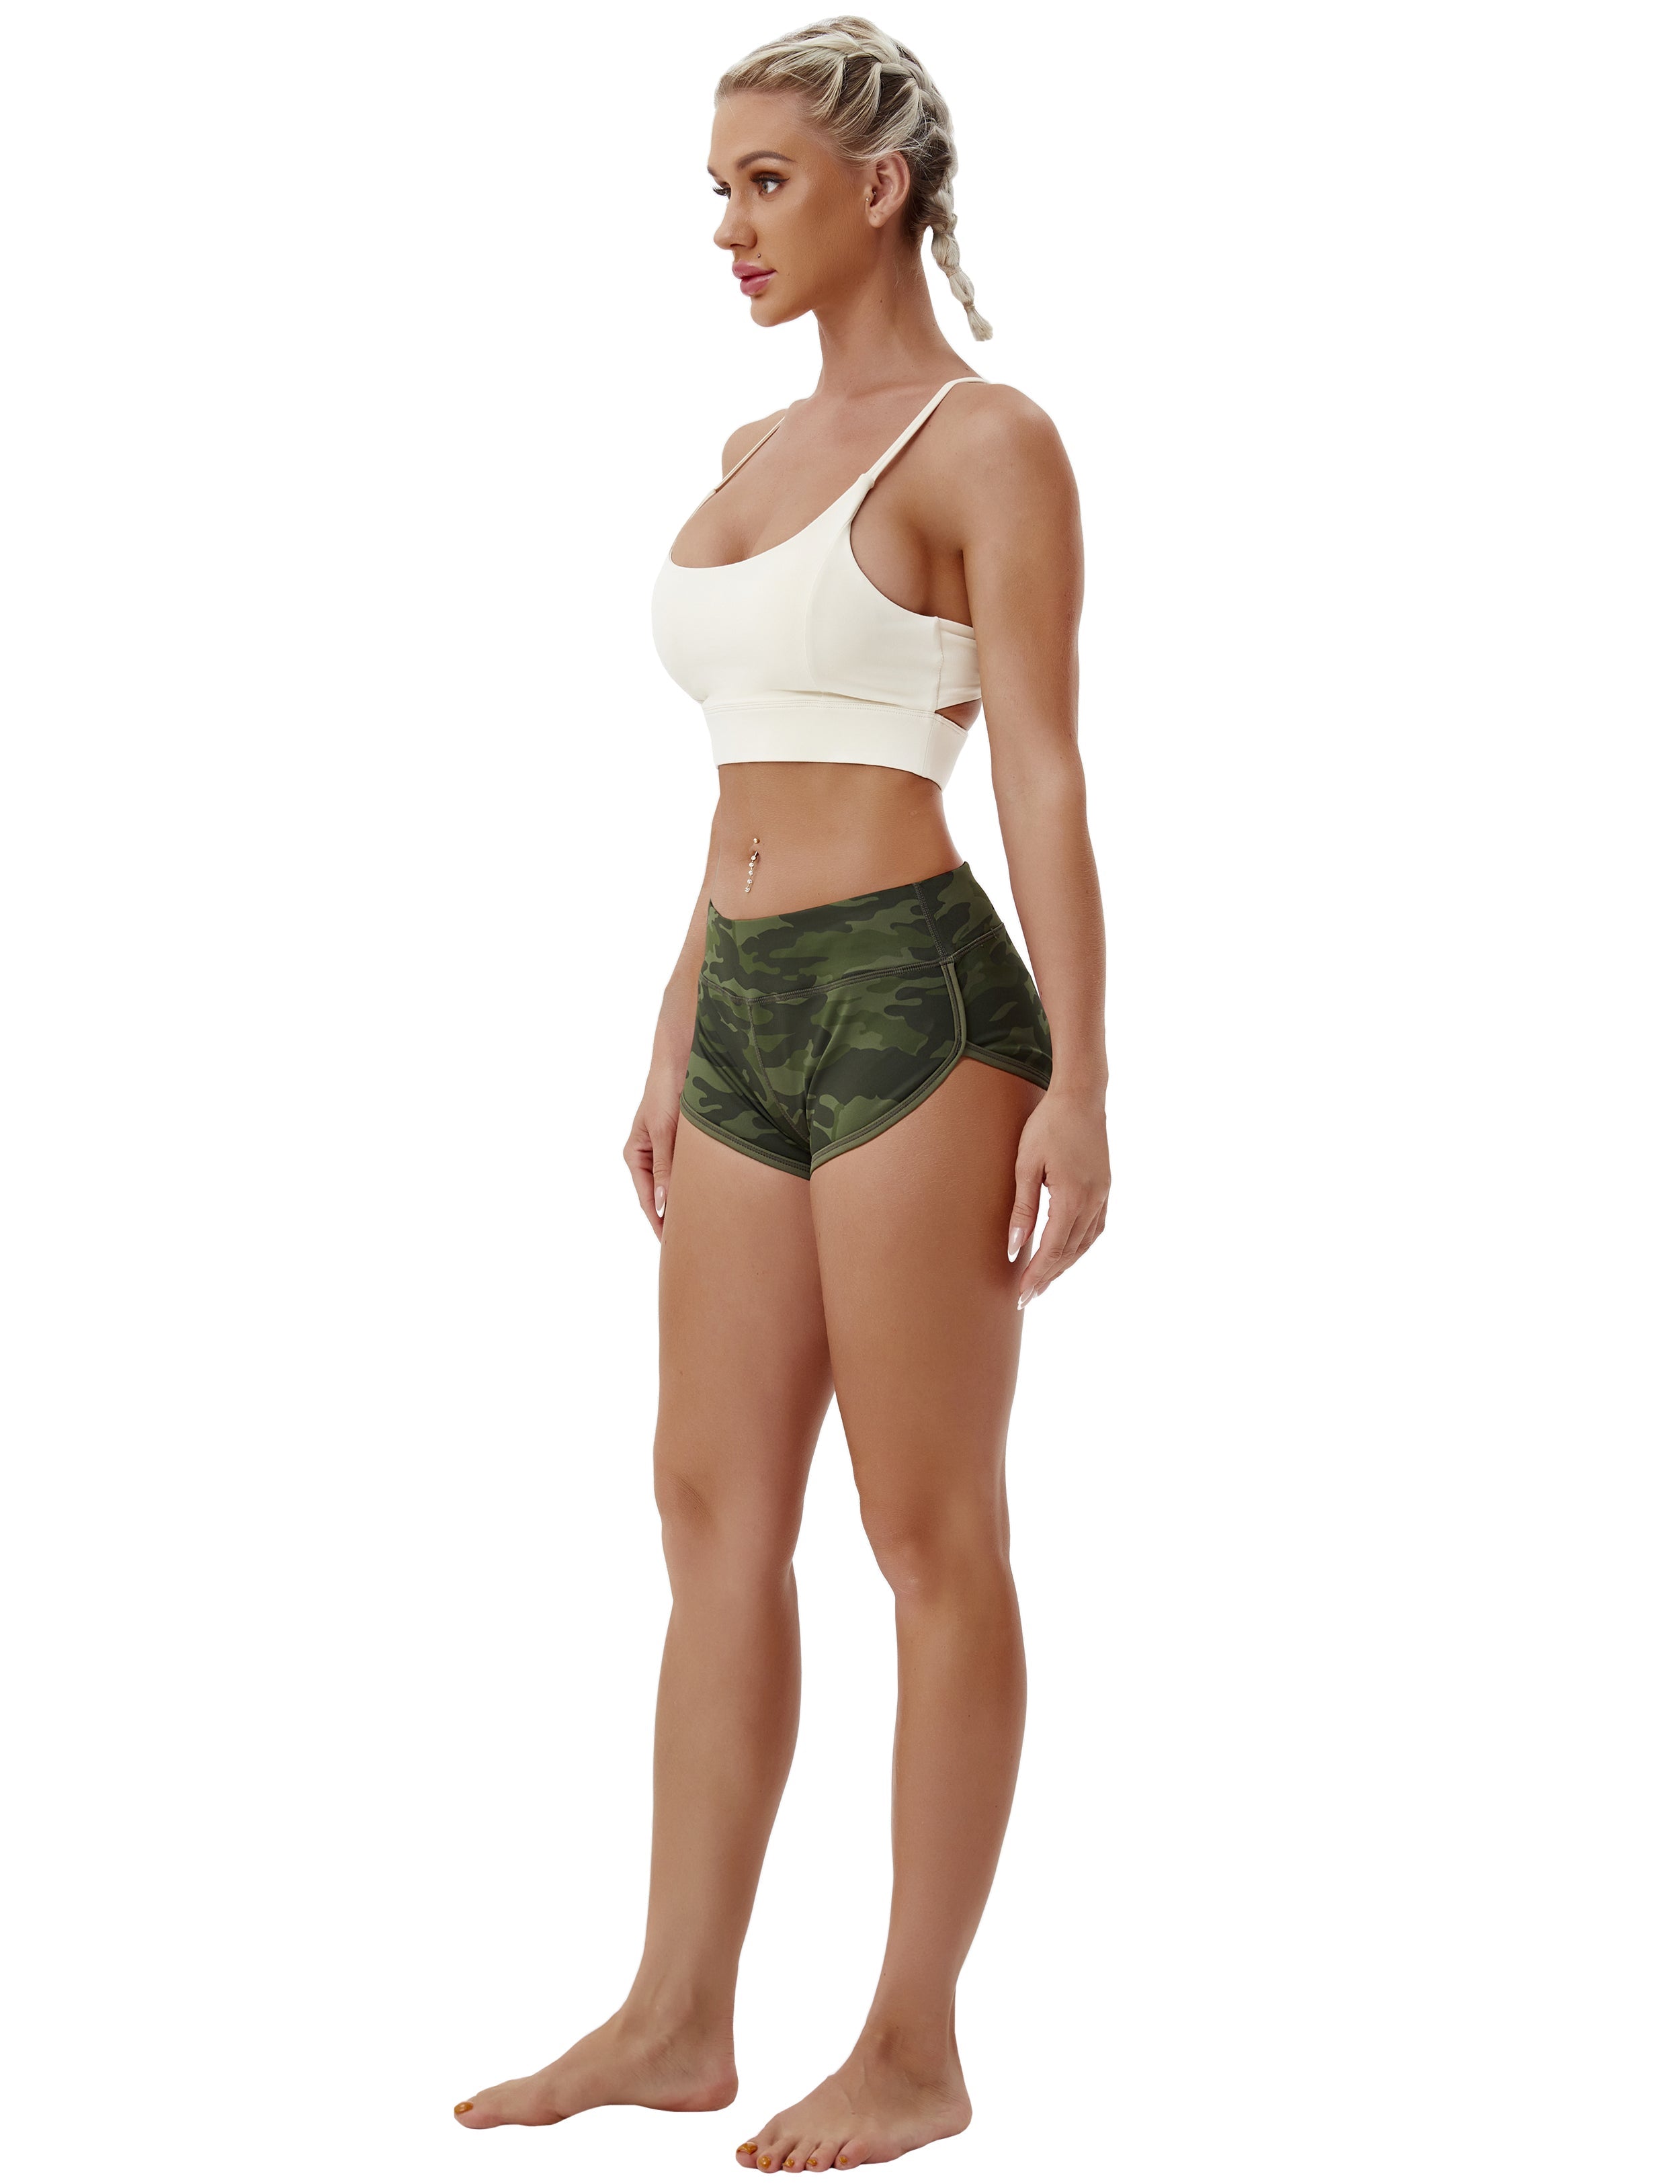 Printed Booty Biking Shorts green camo Sleek, soft, smooth and totally comfortable: our newest sexy style is here. Softest-ever fabric High elasticity High density 4-way stretch Fabric doesn't attract lint easily No see-through Moisture-wicking Machine wash 78% Polyester, 22% Spandex